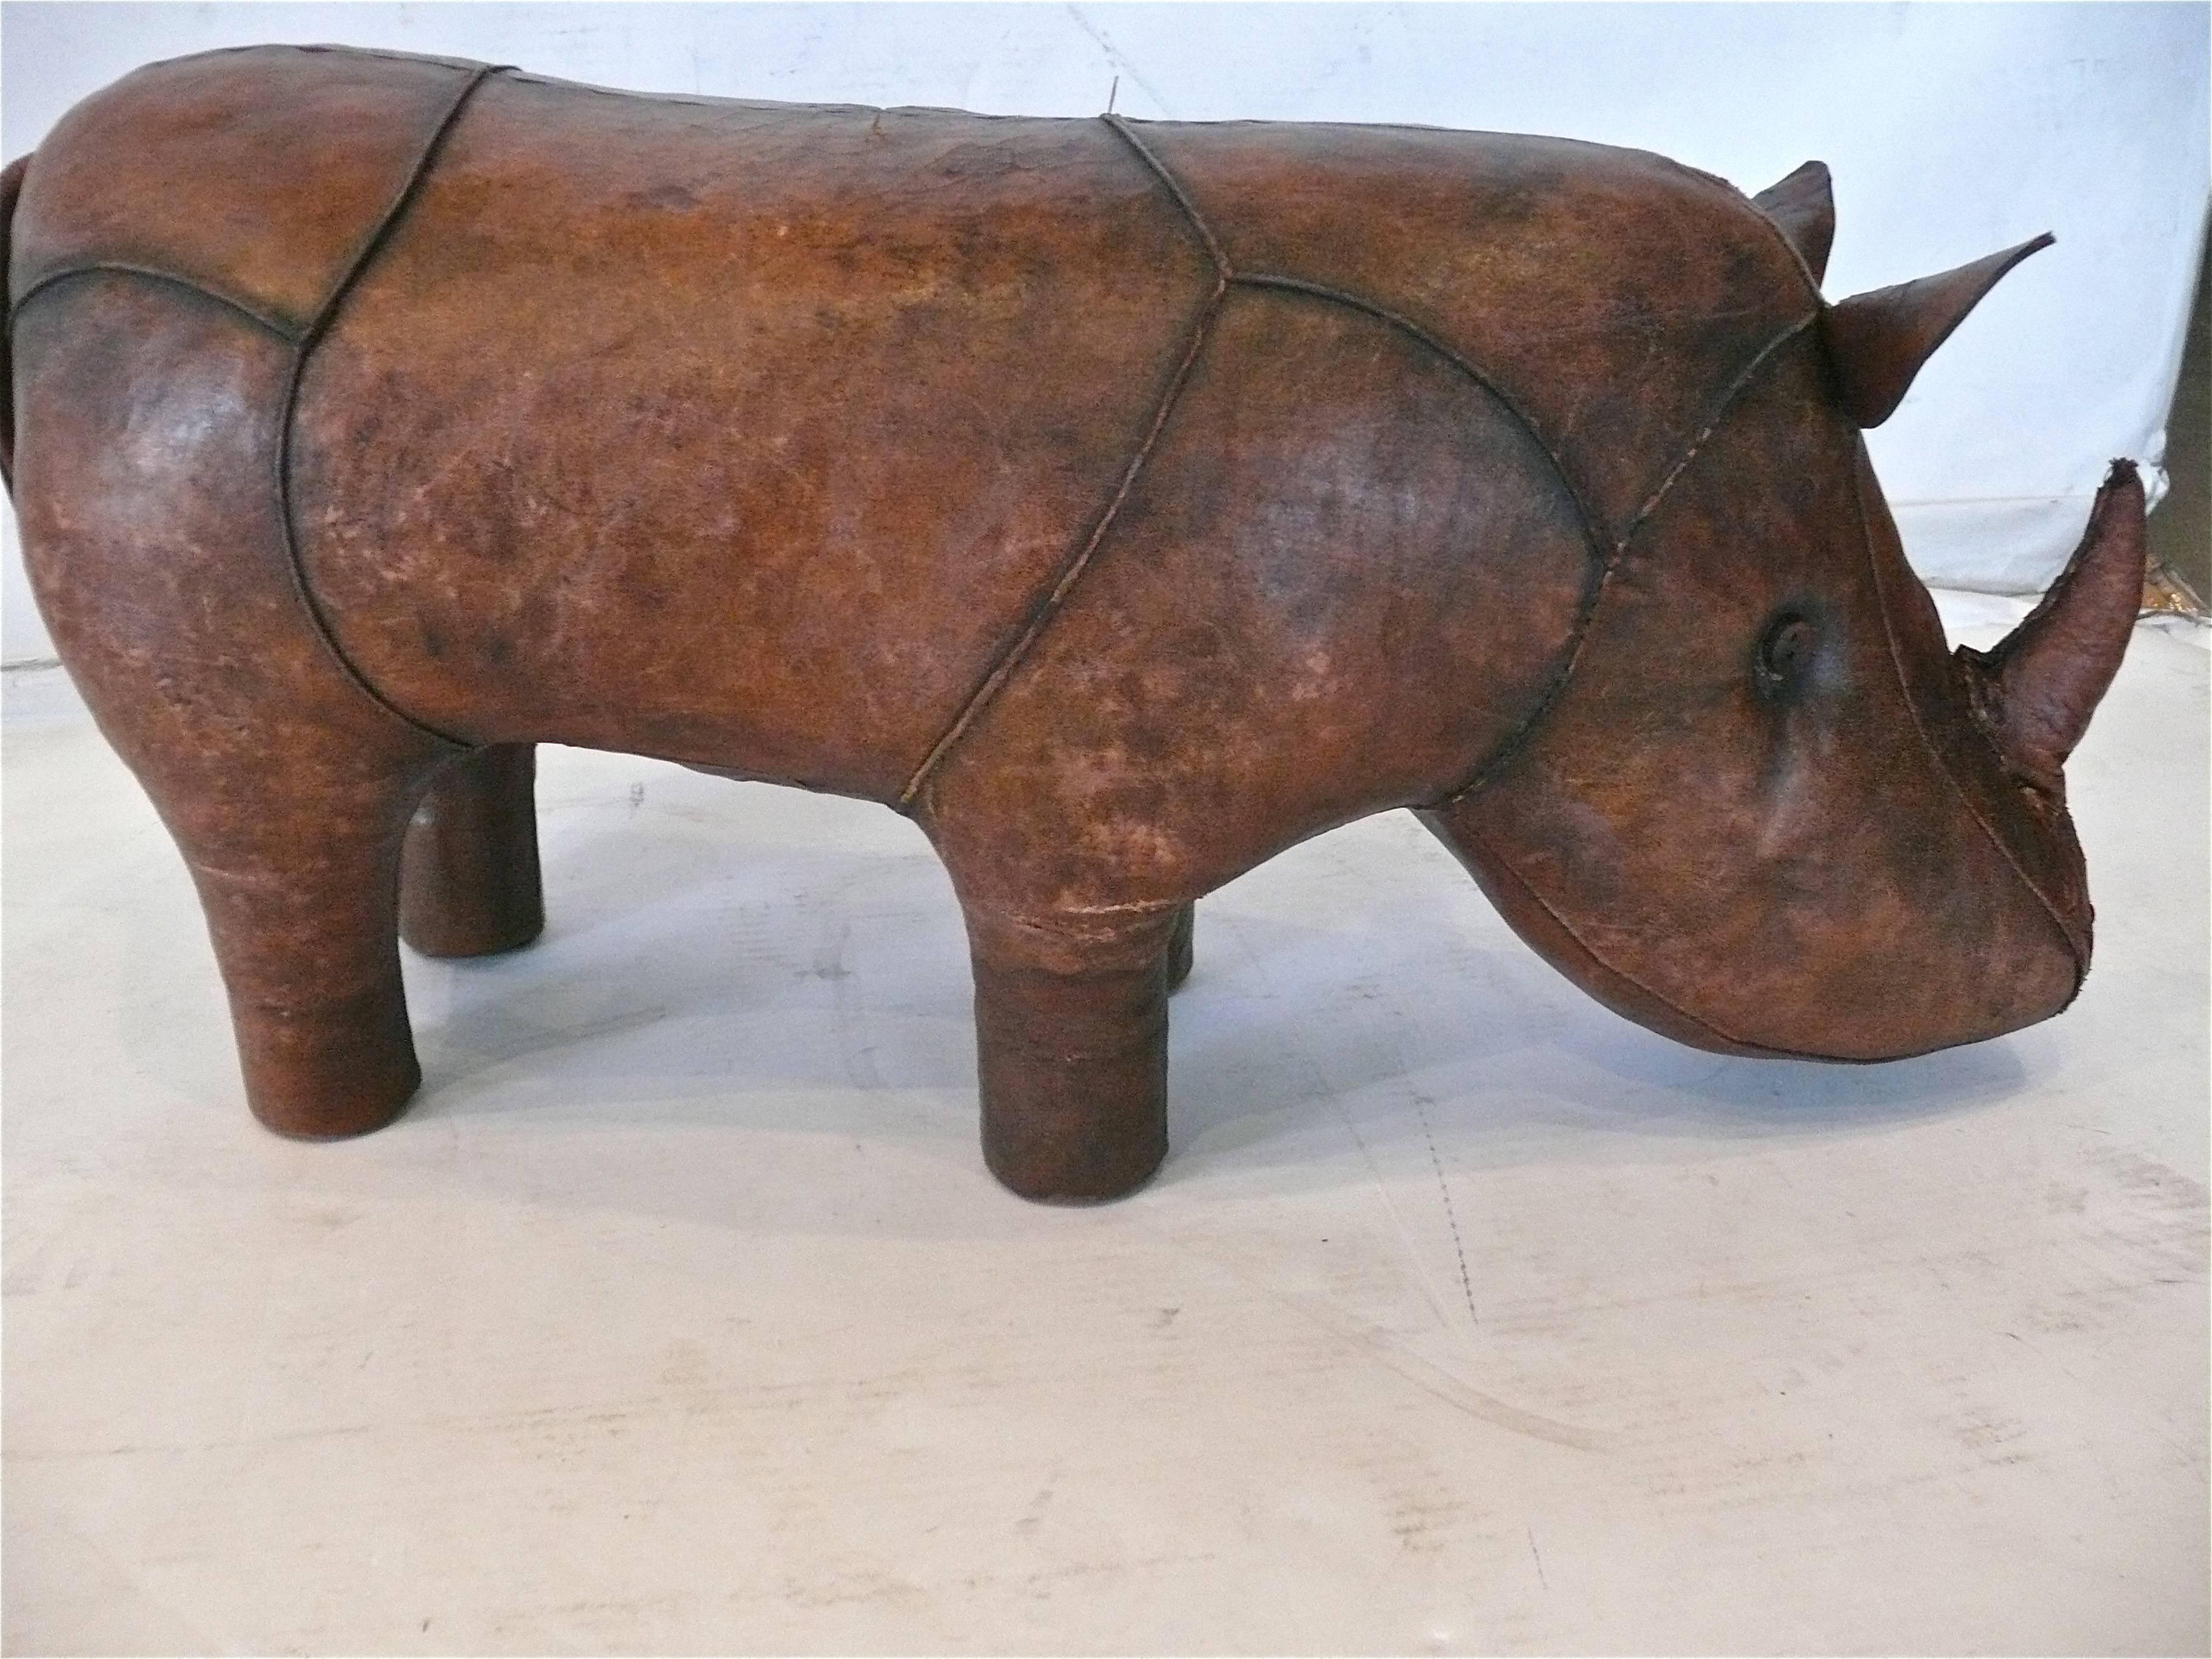 Handsome Rhinoceros designed by Dimitri Omersa for Abercrombie & Fitch as a store display in the 1960s. Great patina to leather.